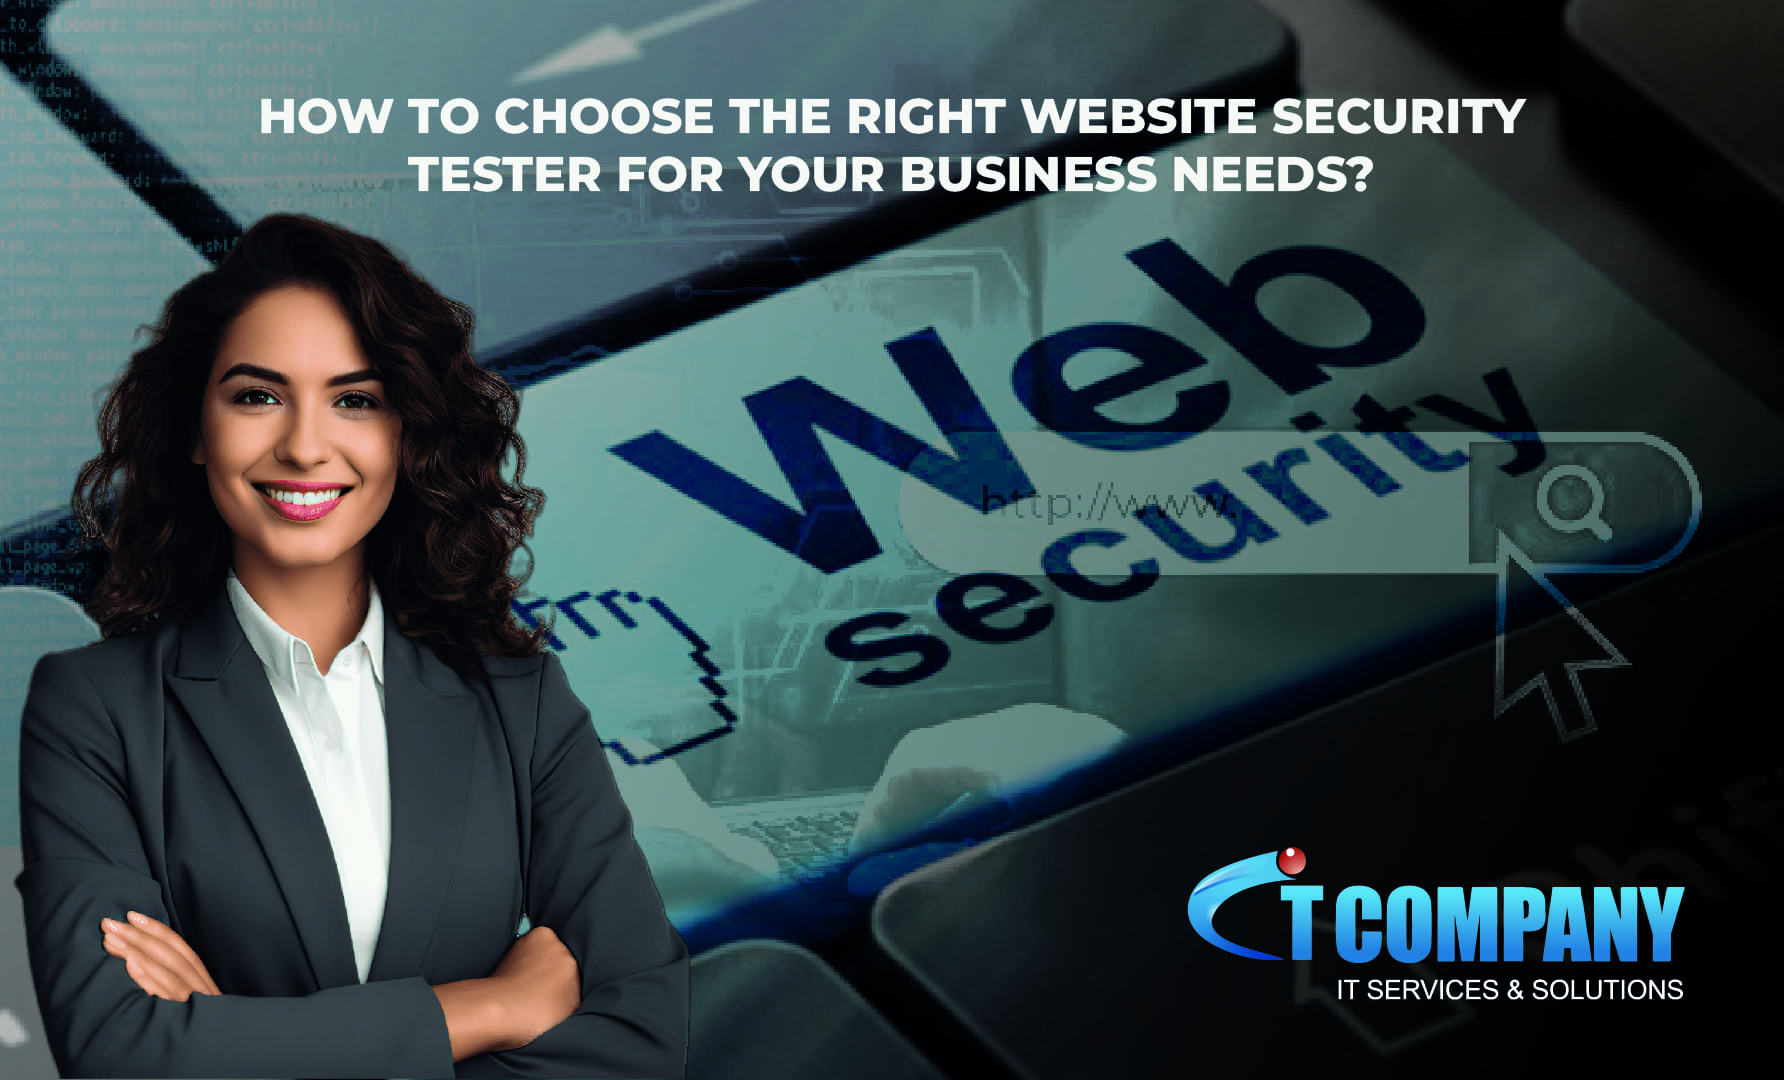 How to Choose the Right Website Security Tester for Your Business Needs